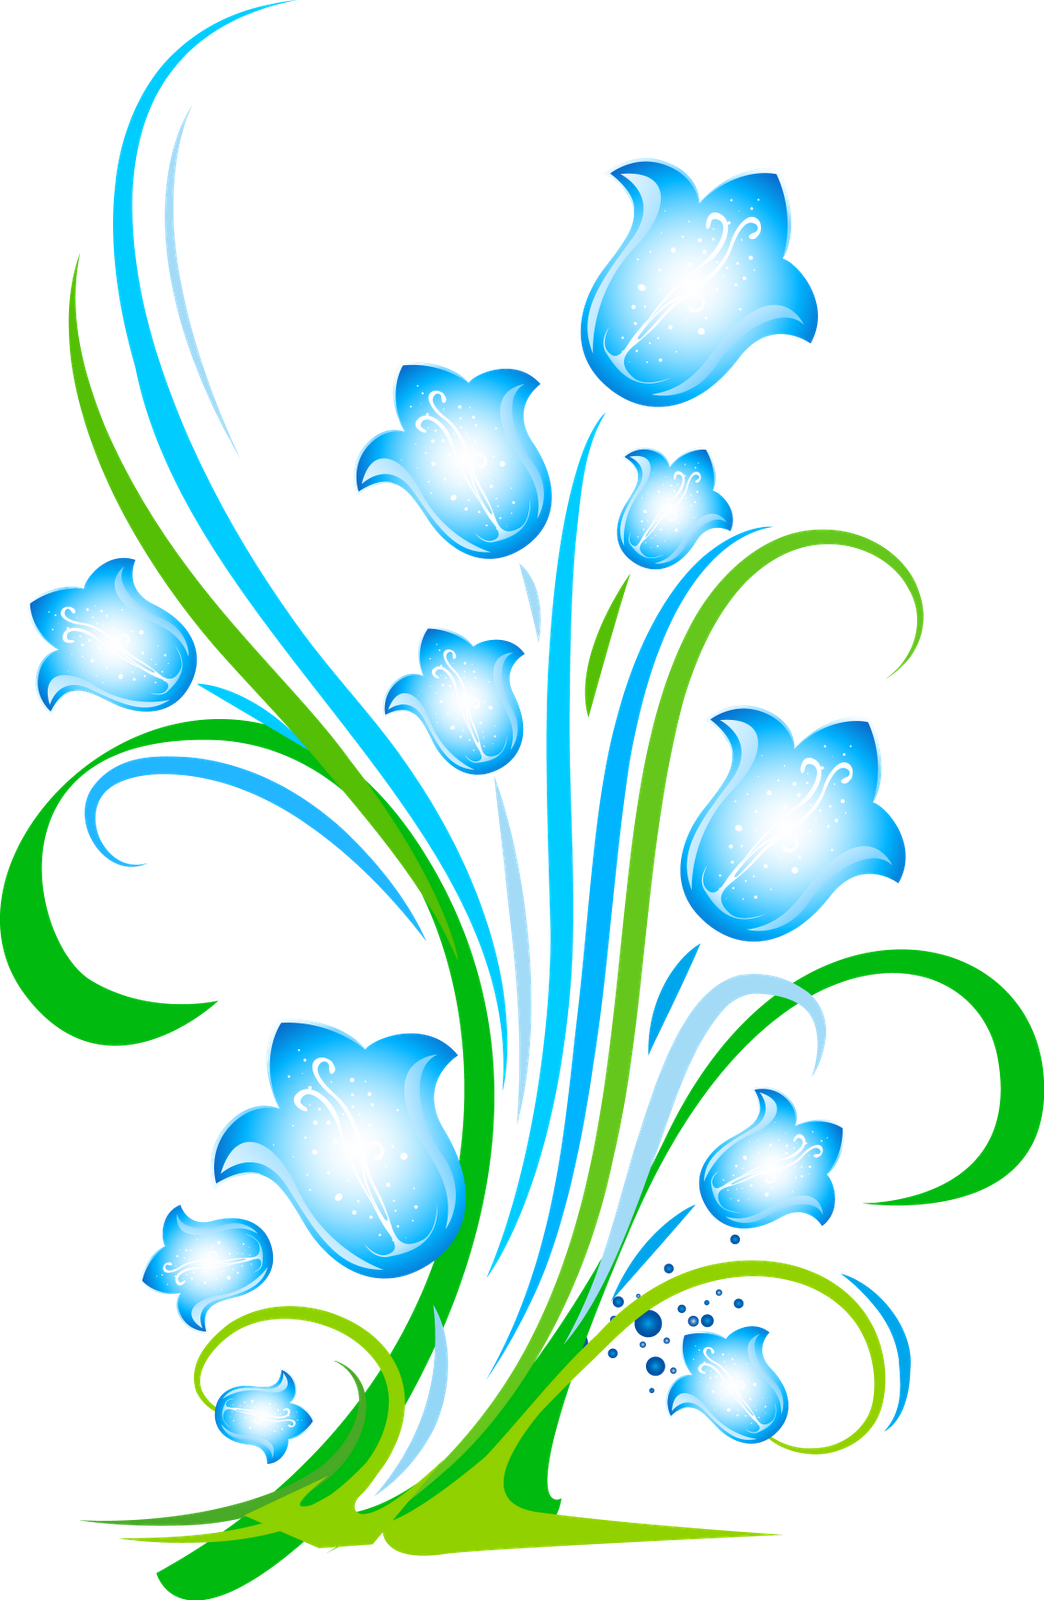 Floral Swirl PNG Image